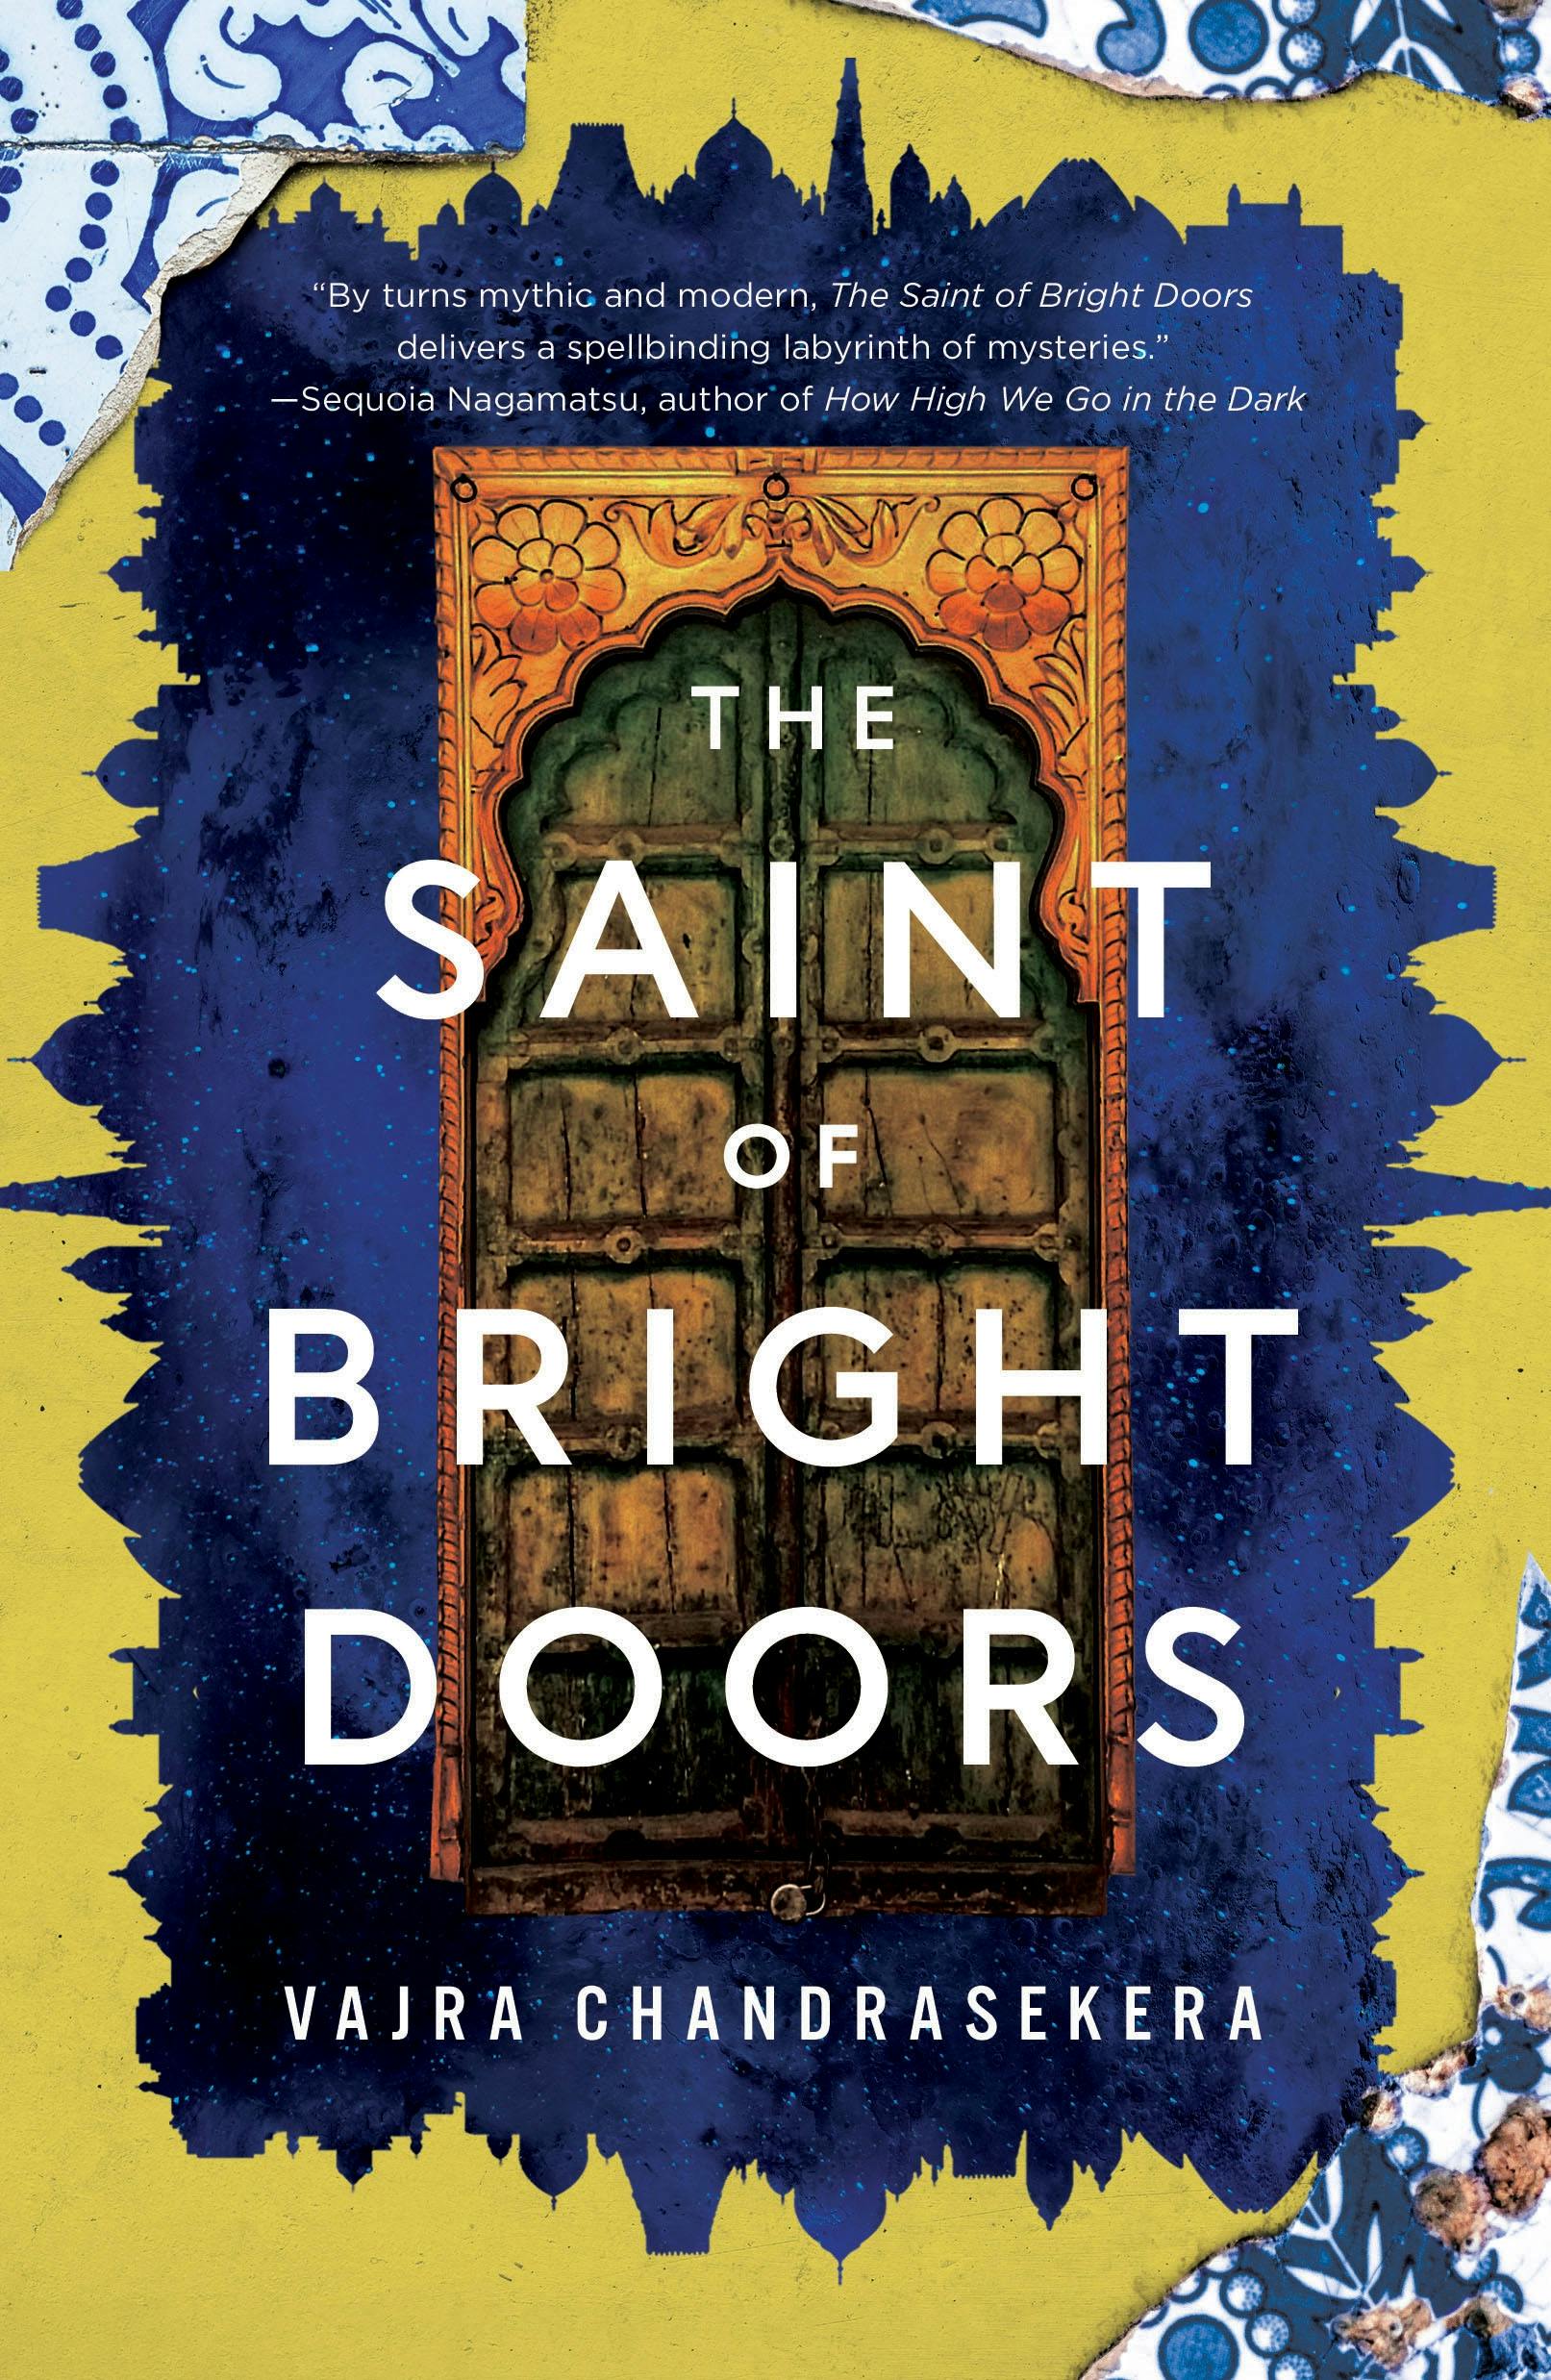 Cover for the book titled as: The Saint of Bright Doors